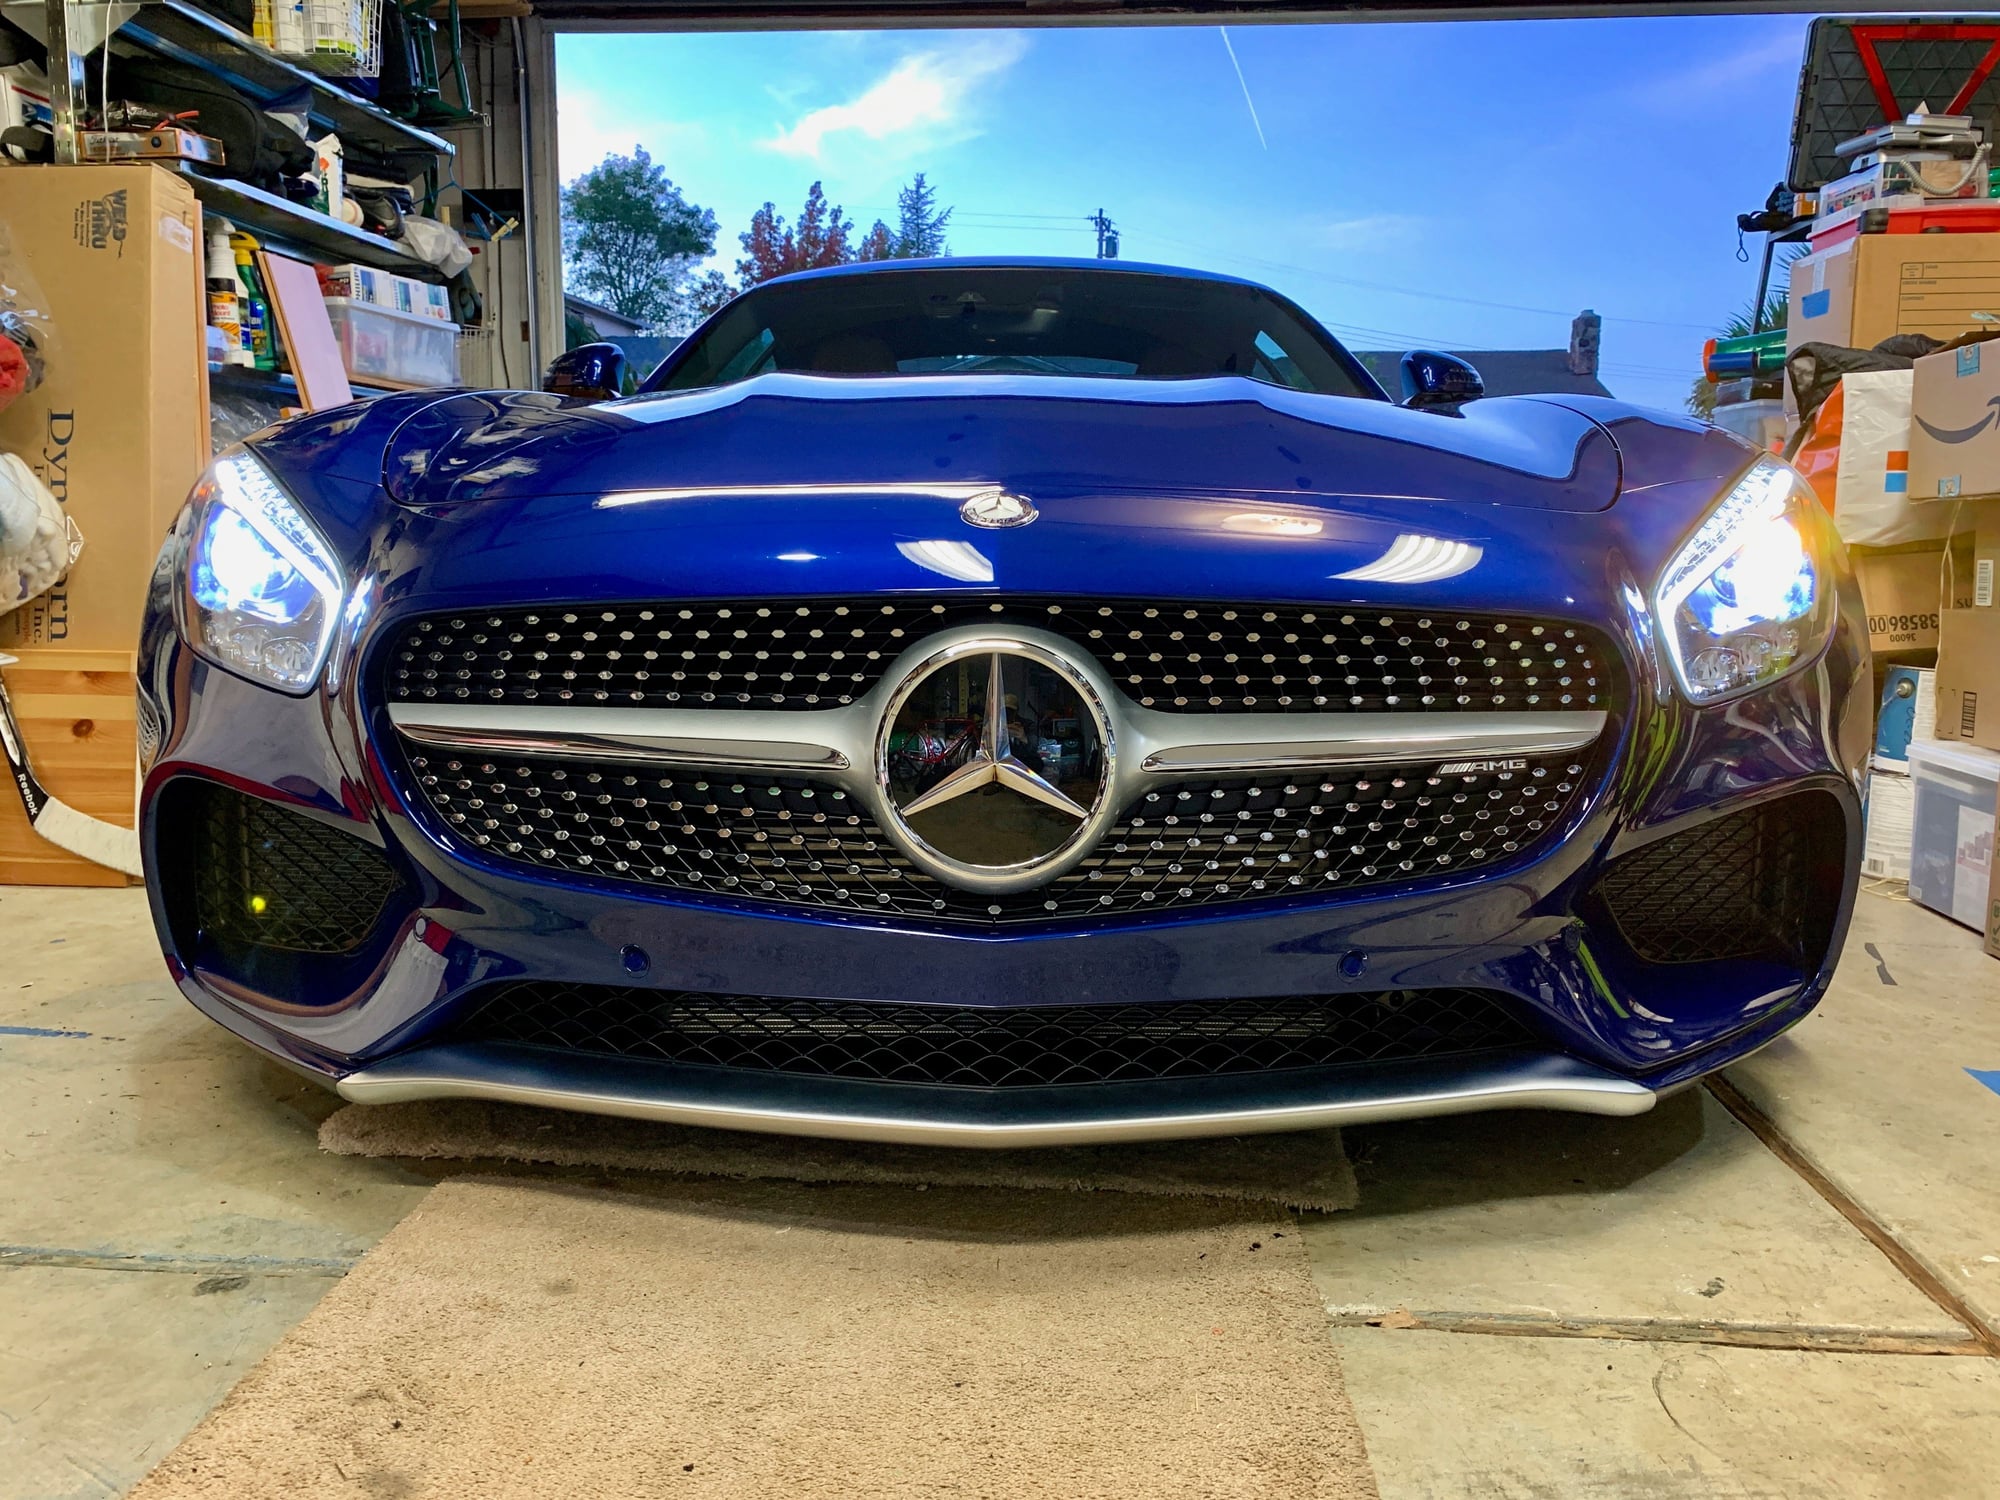 2017 Mercedes-Benz AMG GT - 2017 Brilliant Blue AMG GT w/ 5.8k miles - Used - VIN WDDYJ7HAXHA011024 - 5,800 Miles - 8 cyl - 2WD - Automatic - Coupe - Blue - San Mateo, CA 94402, United States